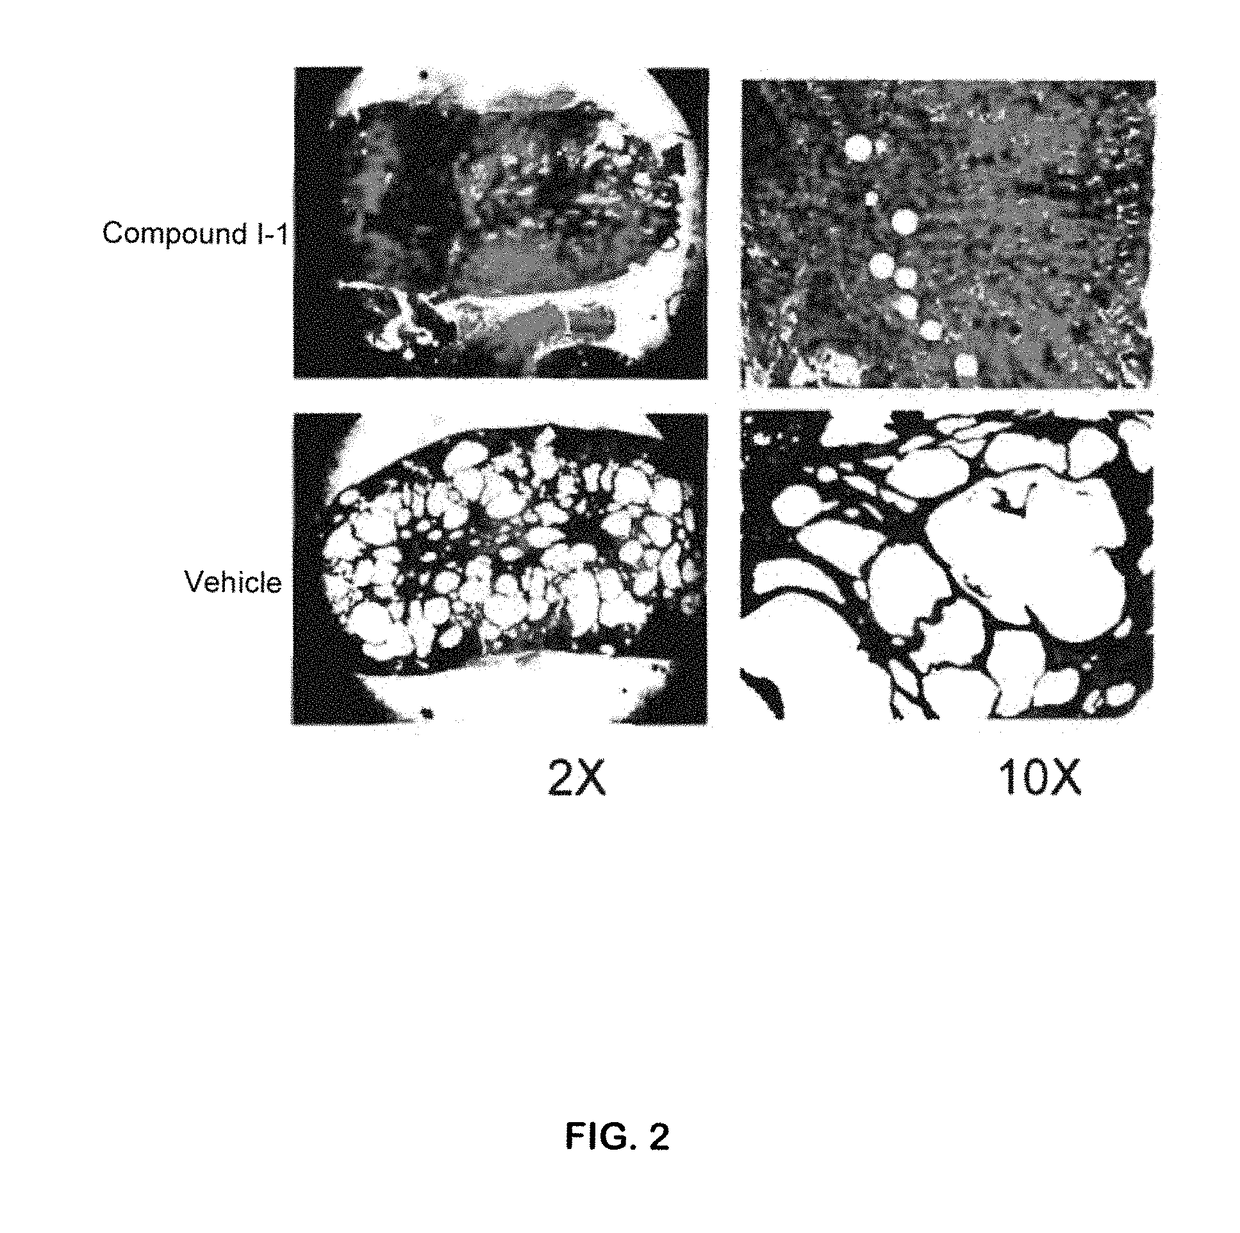 Methods for treating polycystic kidney disease and polycystic liver disease